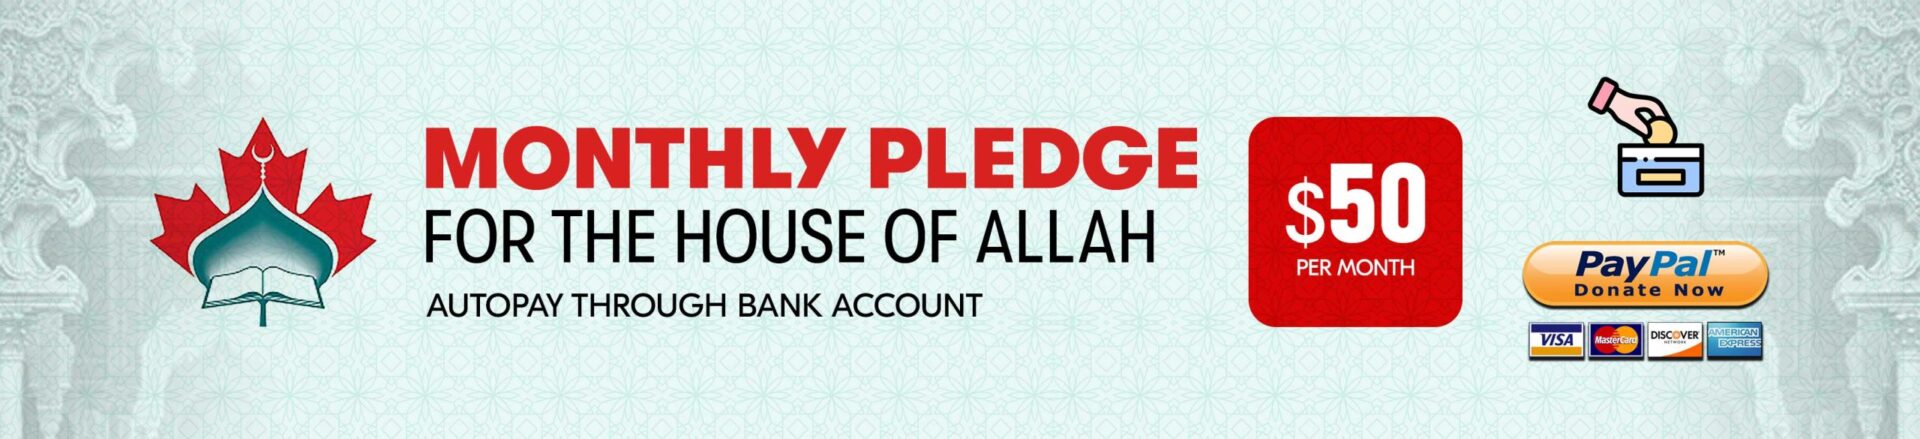 Monthly-Pledge-for-House-of-Allah-Banner